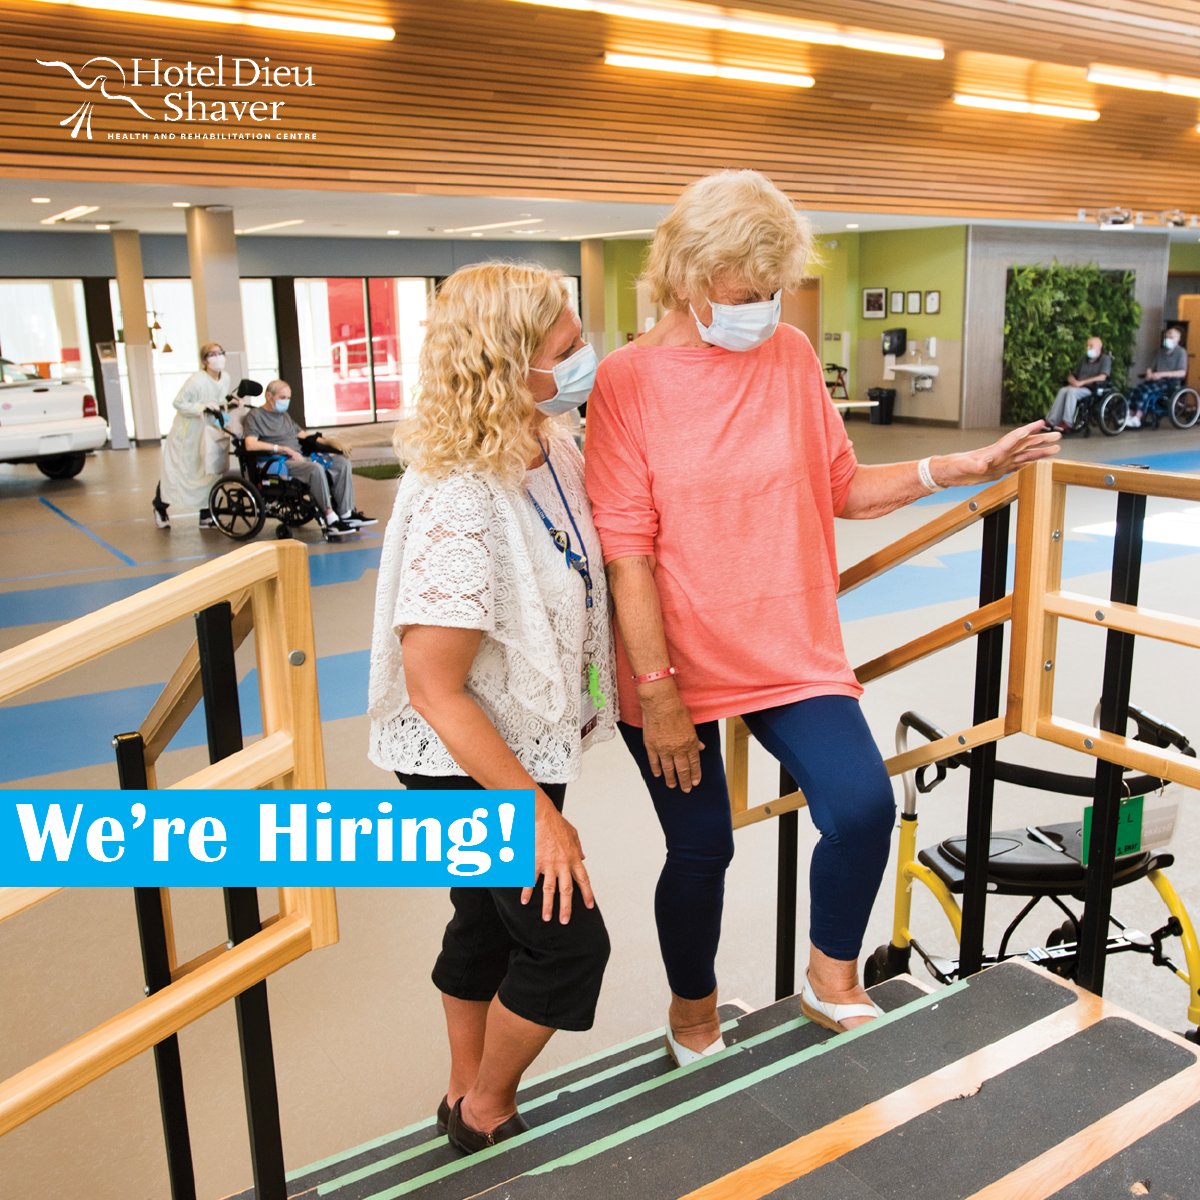 We're hiring! Interested in joining our team of passionate and knowledgeable professionals? Hotel Dieu Shaver is hiring the following positions... 🔹 Rehab Assistant 🔹 Spiritual Care Practitioner 🔹 Recreation Therapy Assistant Apply Here ➡ bit.ly/HDS_Careers